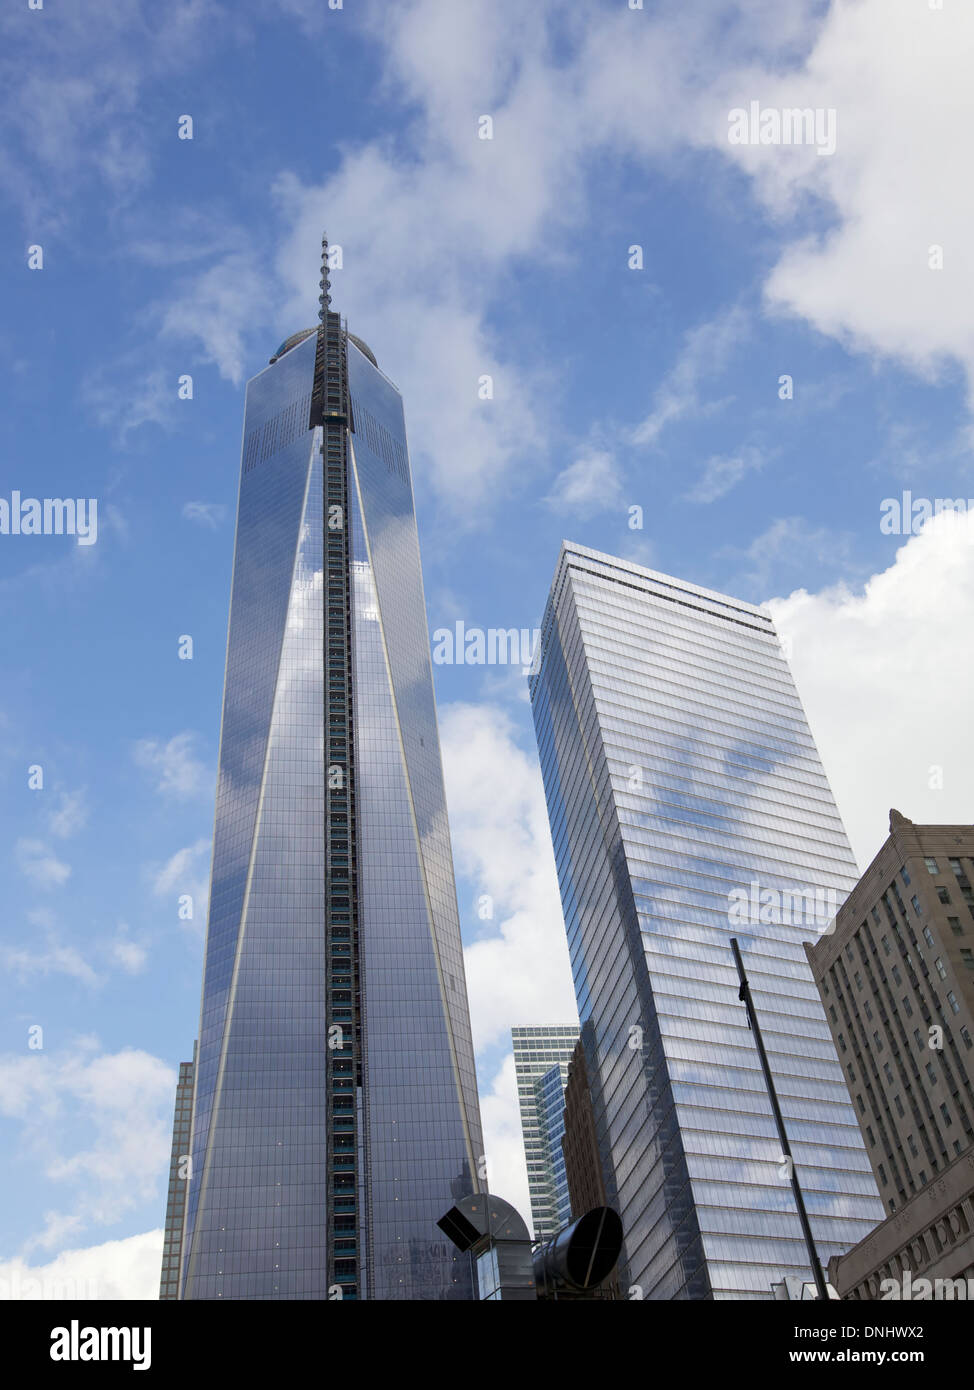 Building the Freedom Tower in lower Manhattan, New York City, USA Stock Photo